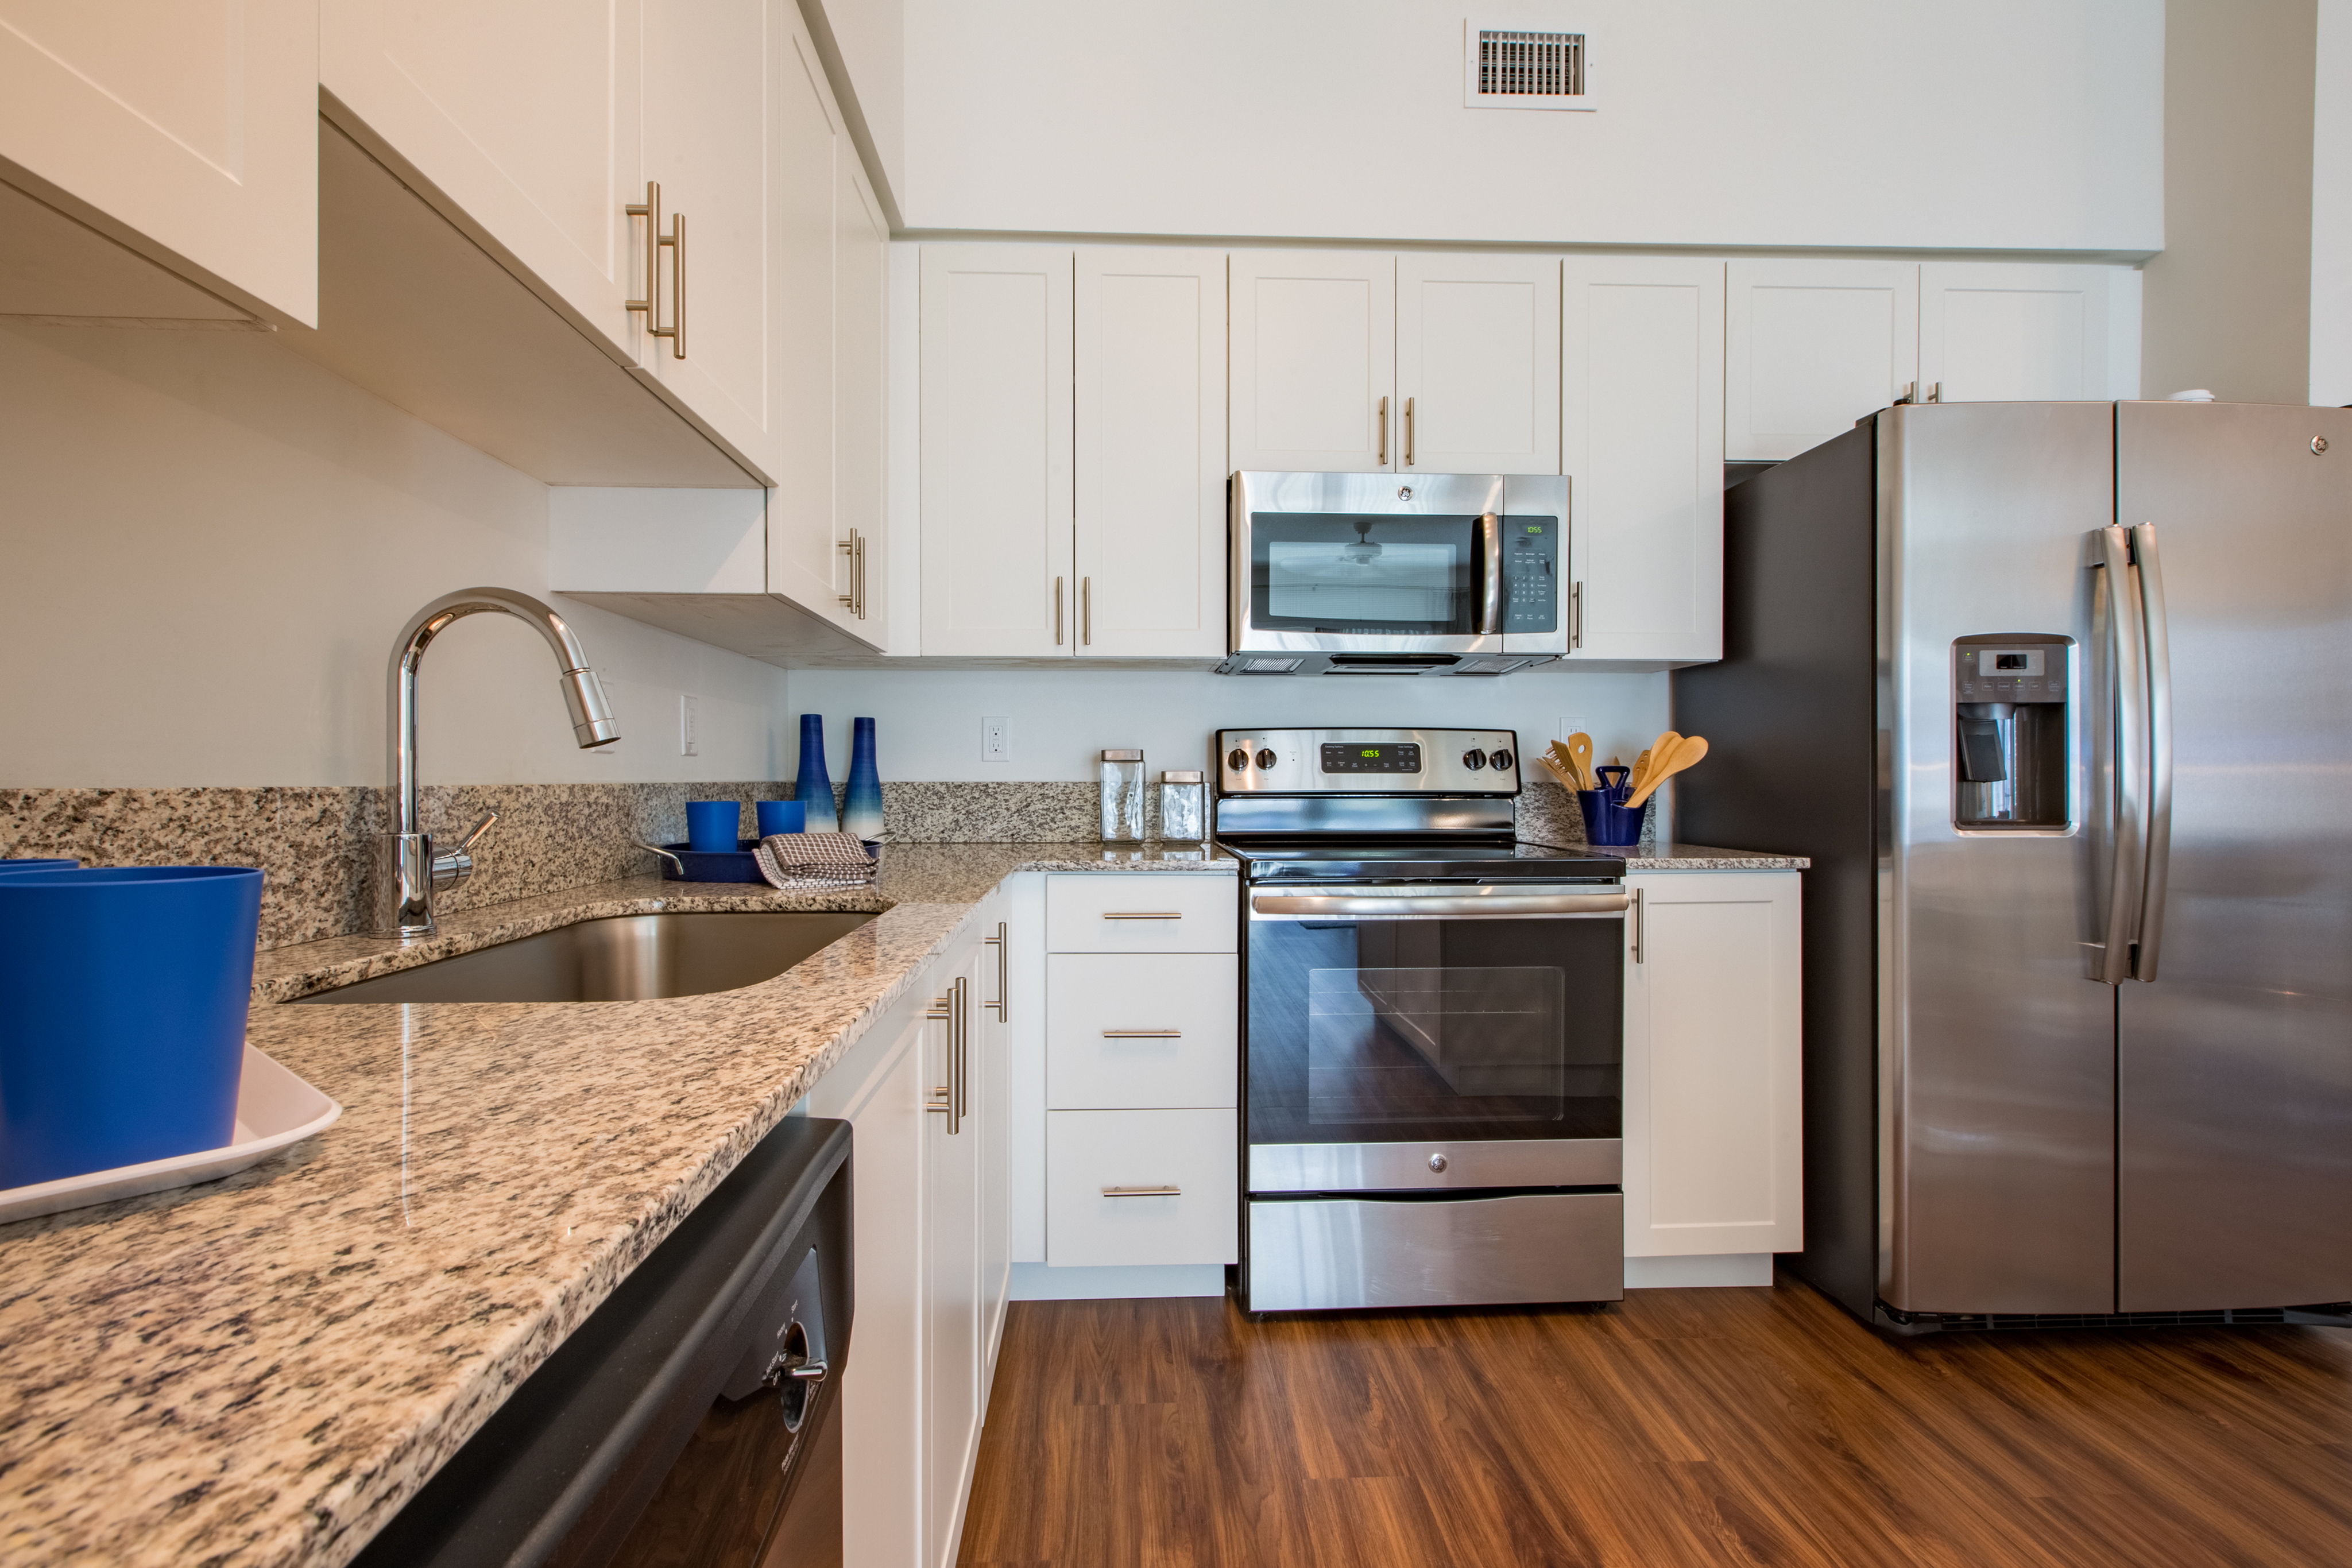 Enjoy Our Gourmet Kitchen, With View of Island, Granite Countertop, and Stainless Steel Appliances at Cottonwood West Palm Apartments